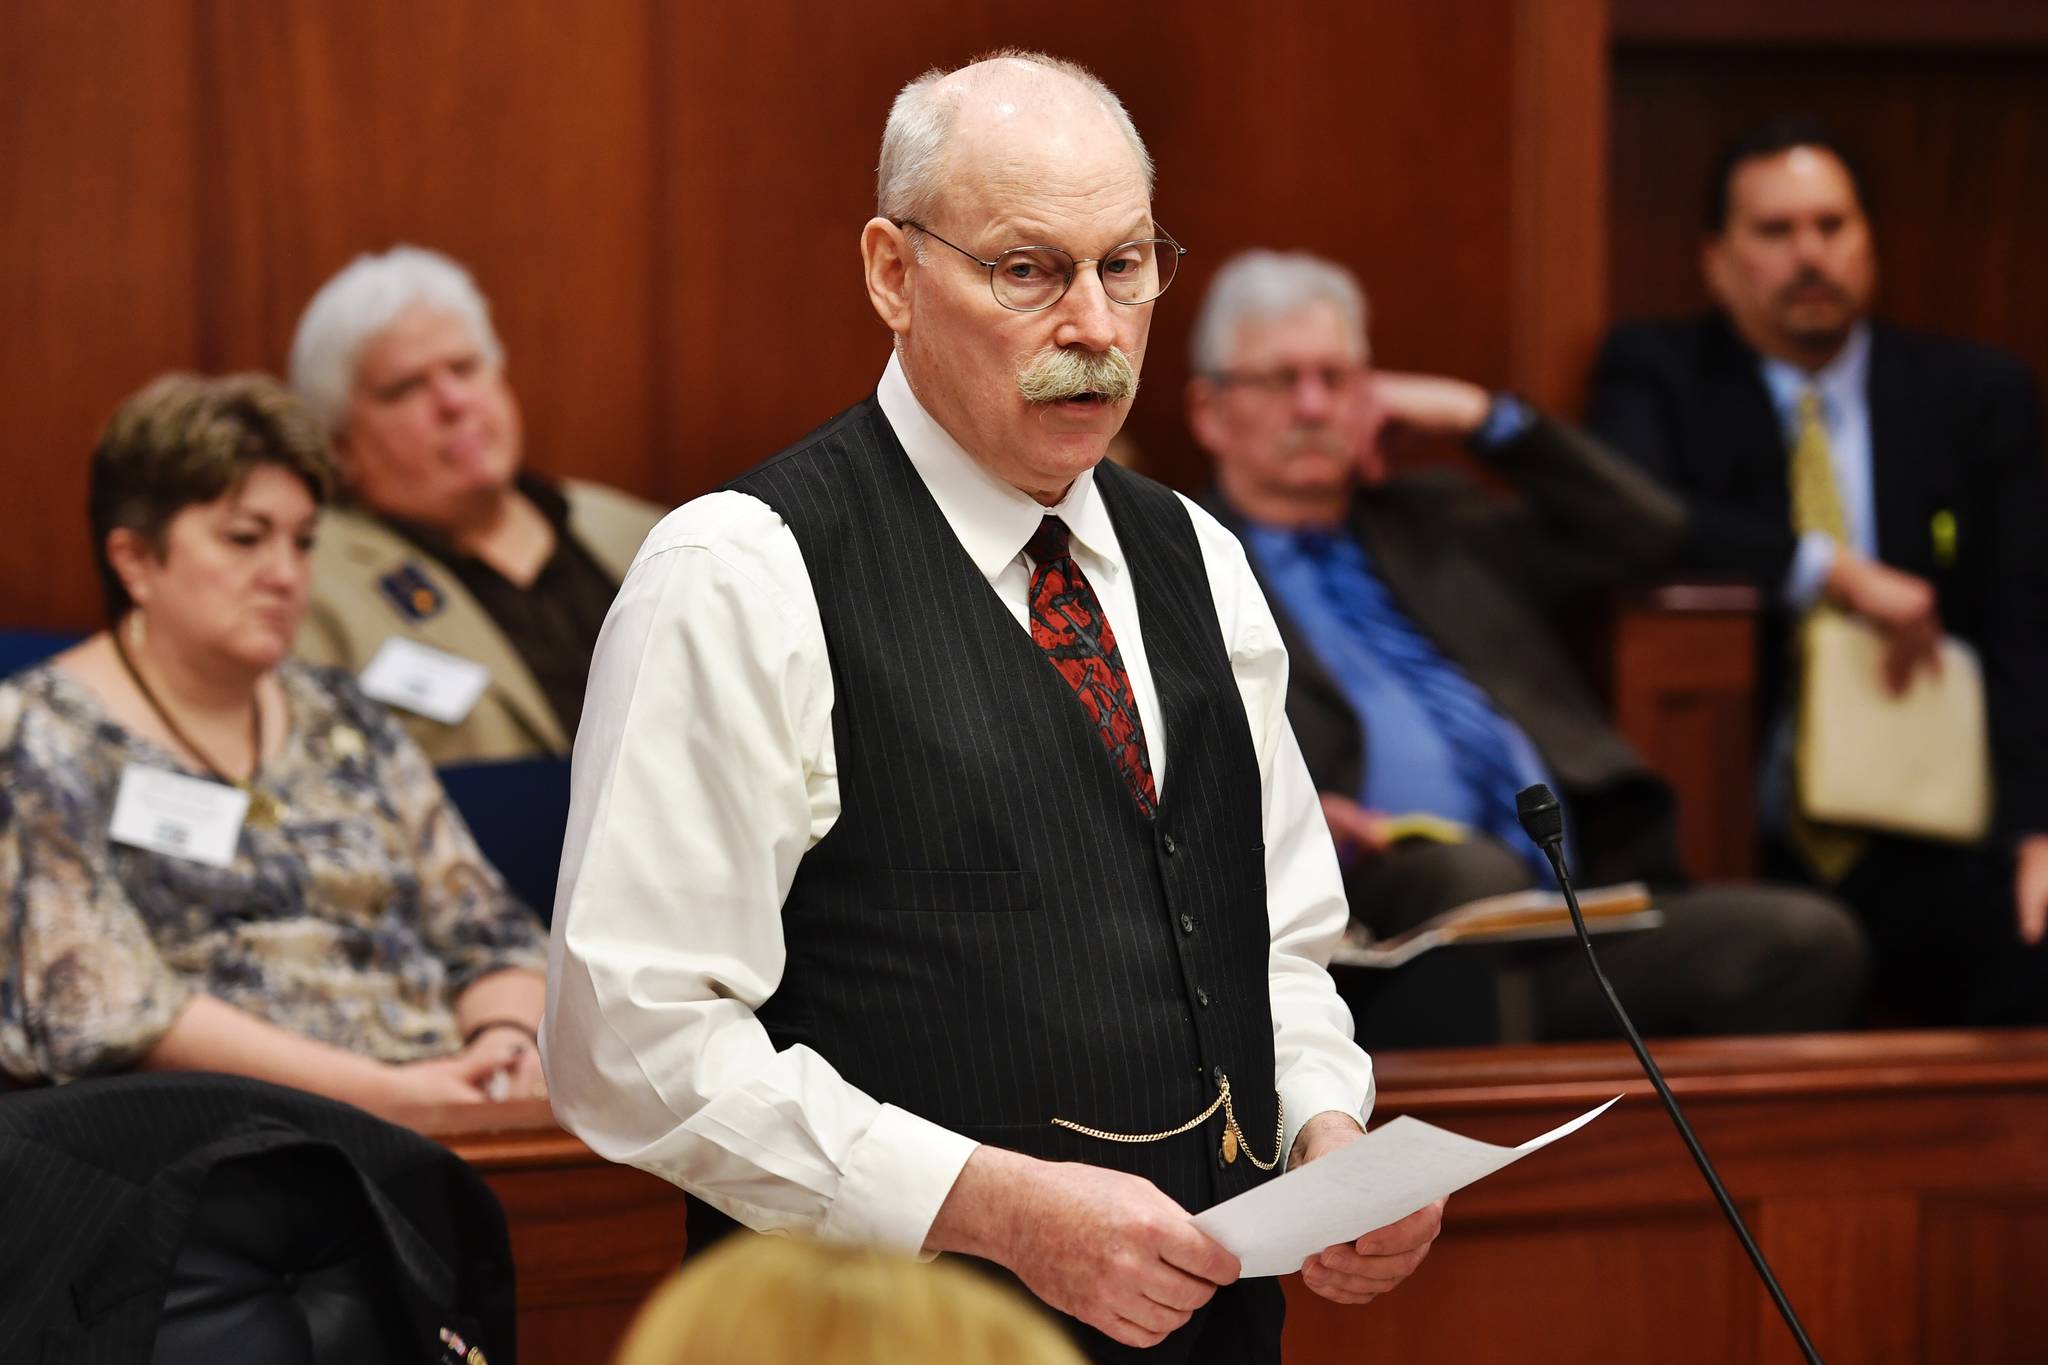 Sen. Bert Stedman, R-Sitka, speaks about CSSB 38, a supplemental appropriation bill for earthquake relief, during a Senate floor session at the Capitol on Monday, March 25, 2019. The $130 million bill passed unanimously. (Michael Penn | Juneau Empire)